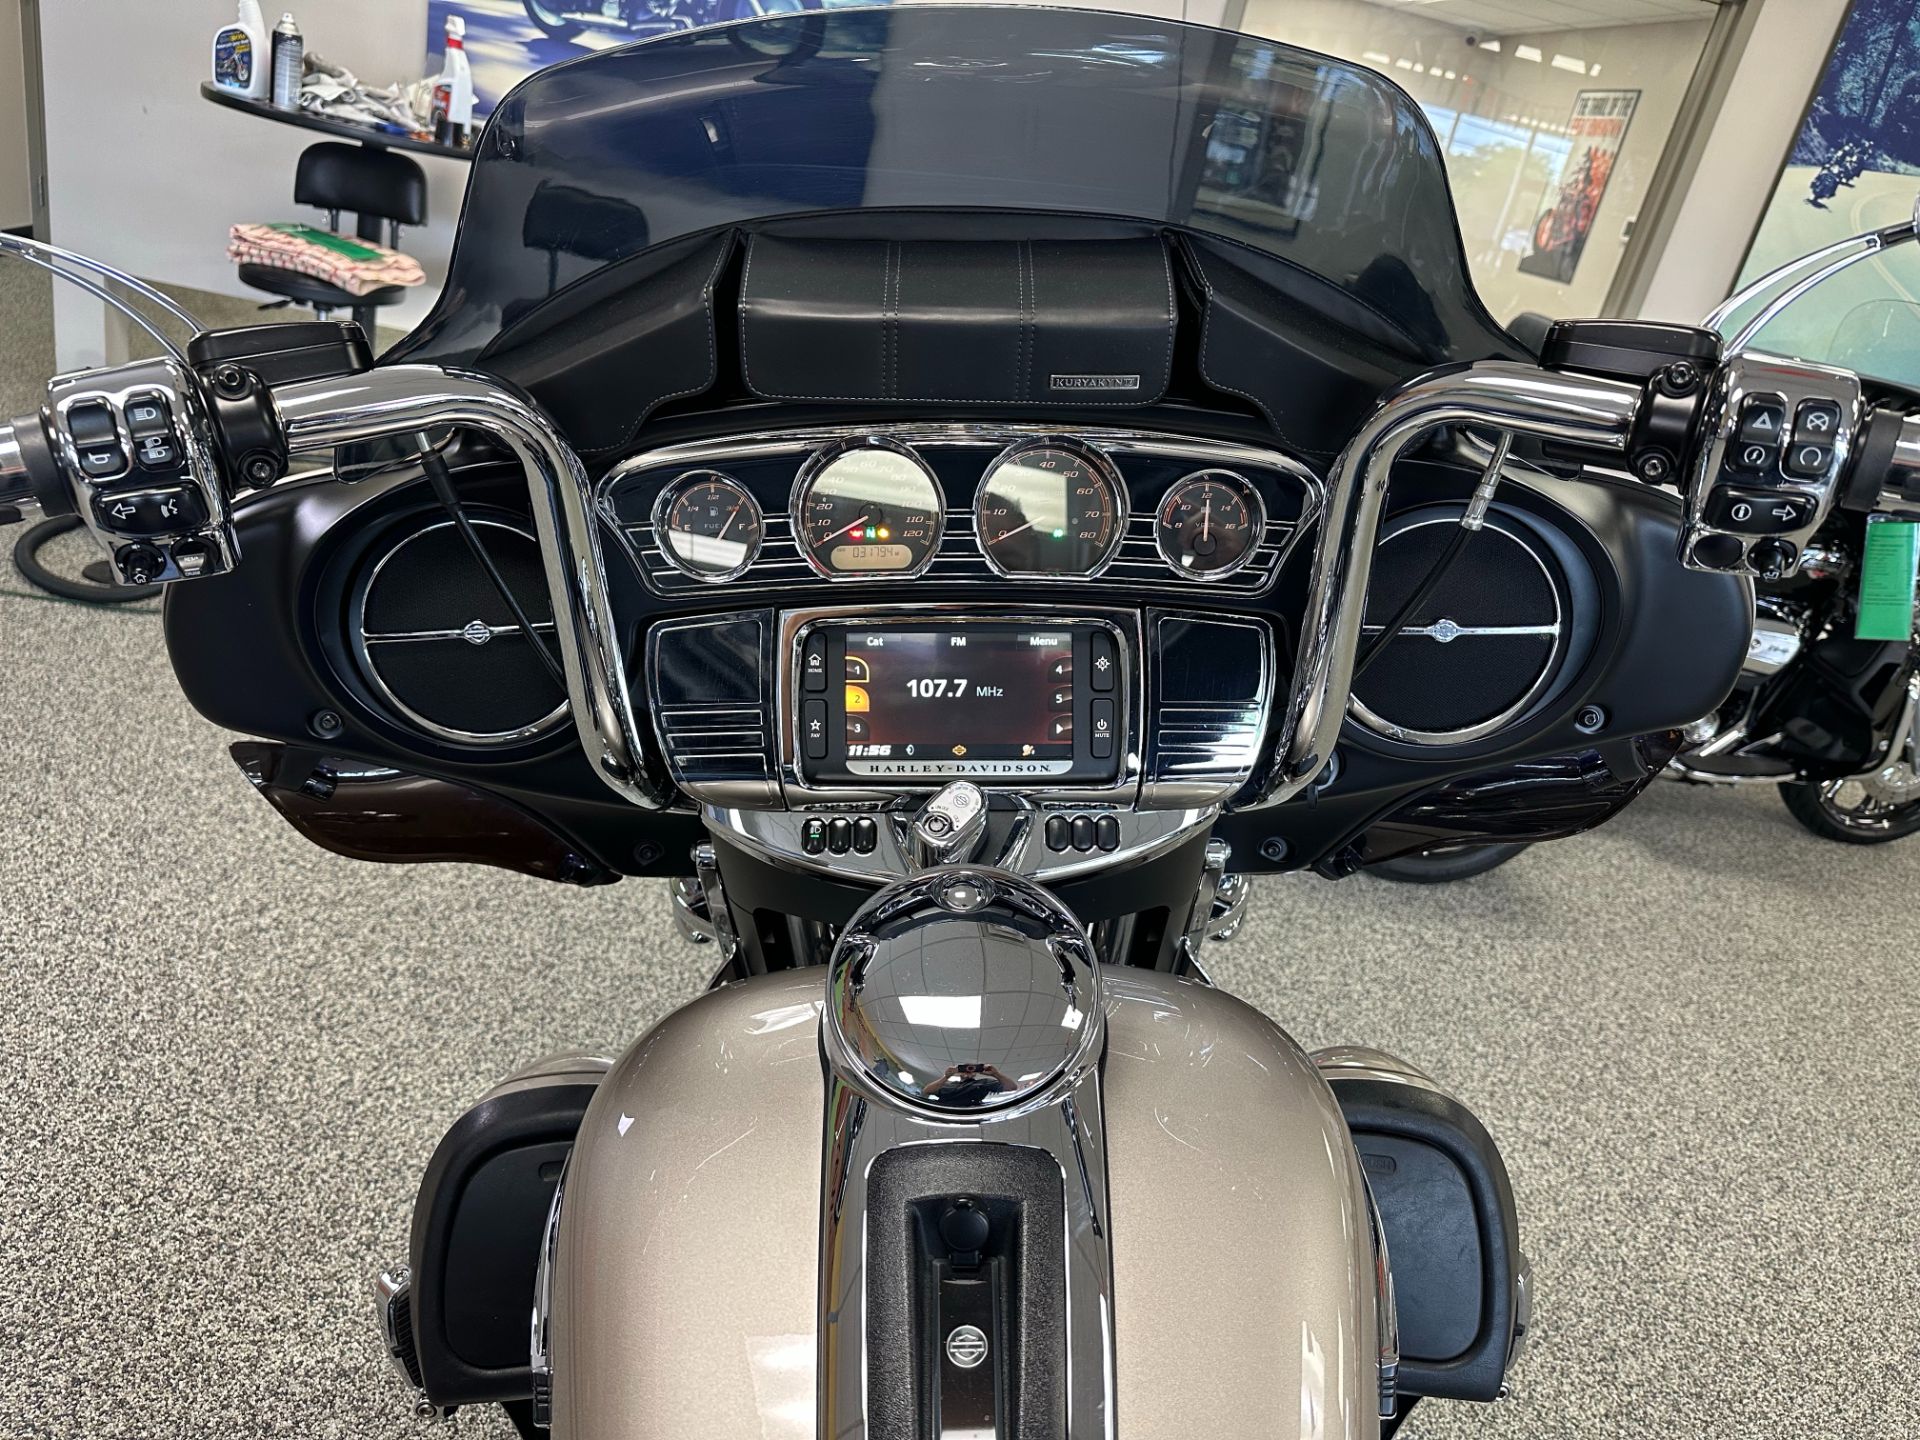 2018 Harley-Davidson Electra Glide® Ultra Classic® in Knoxville, Tennessee - Photo 19